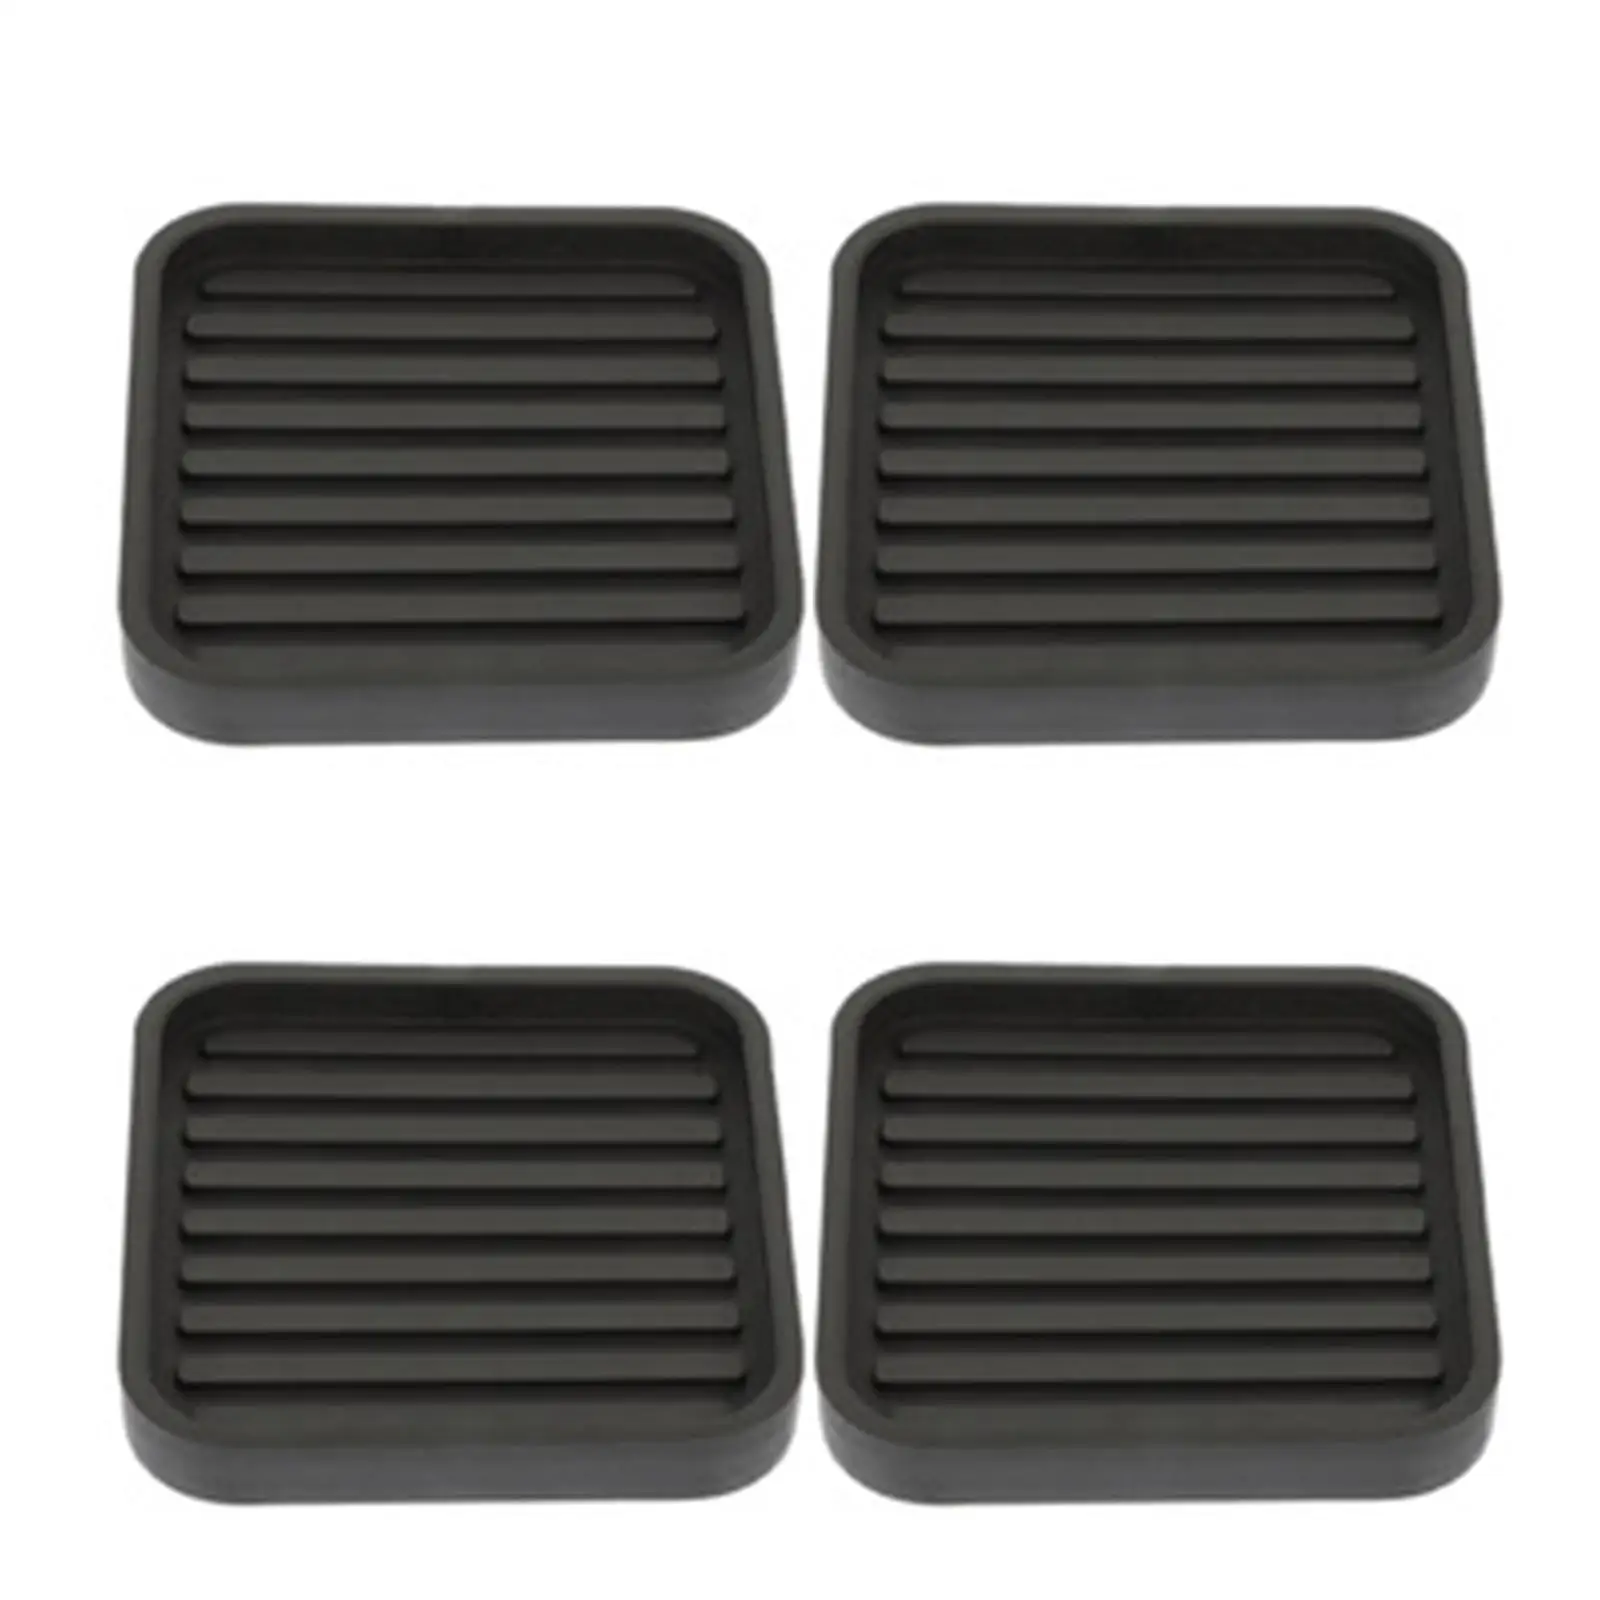 4x Square Rubber Furniture Caster Cups Non Slip Casters Furniture Wheel Stoppers Rubber feet for Chairs Carpet Sofas